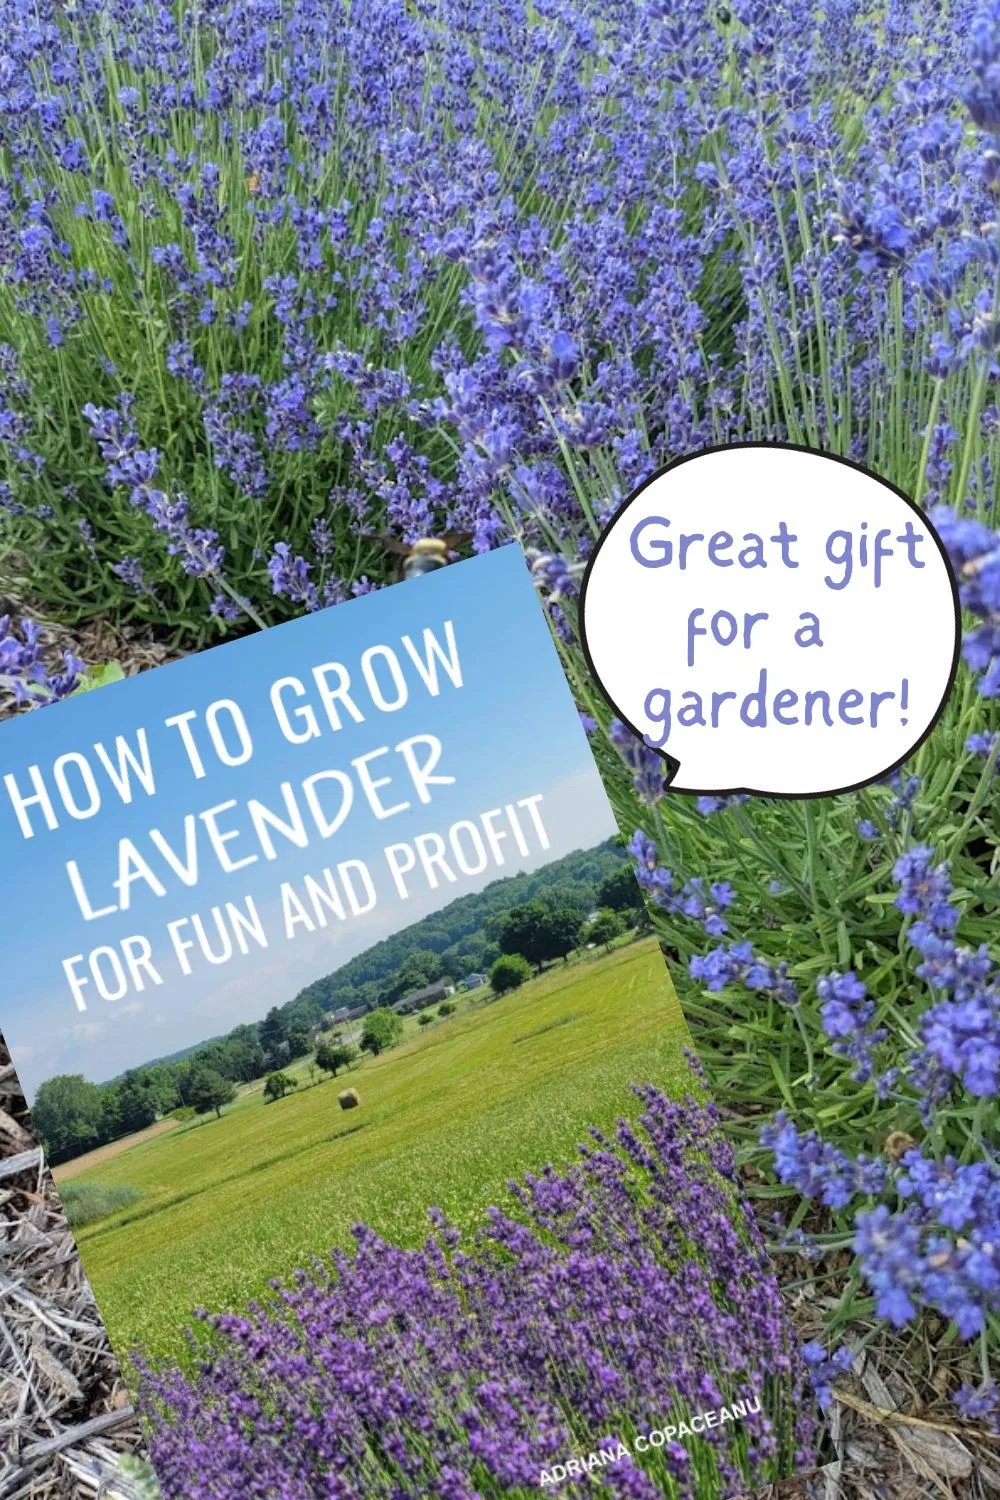 How to grow lavender for fun and profit - great gift for a gardener!